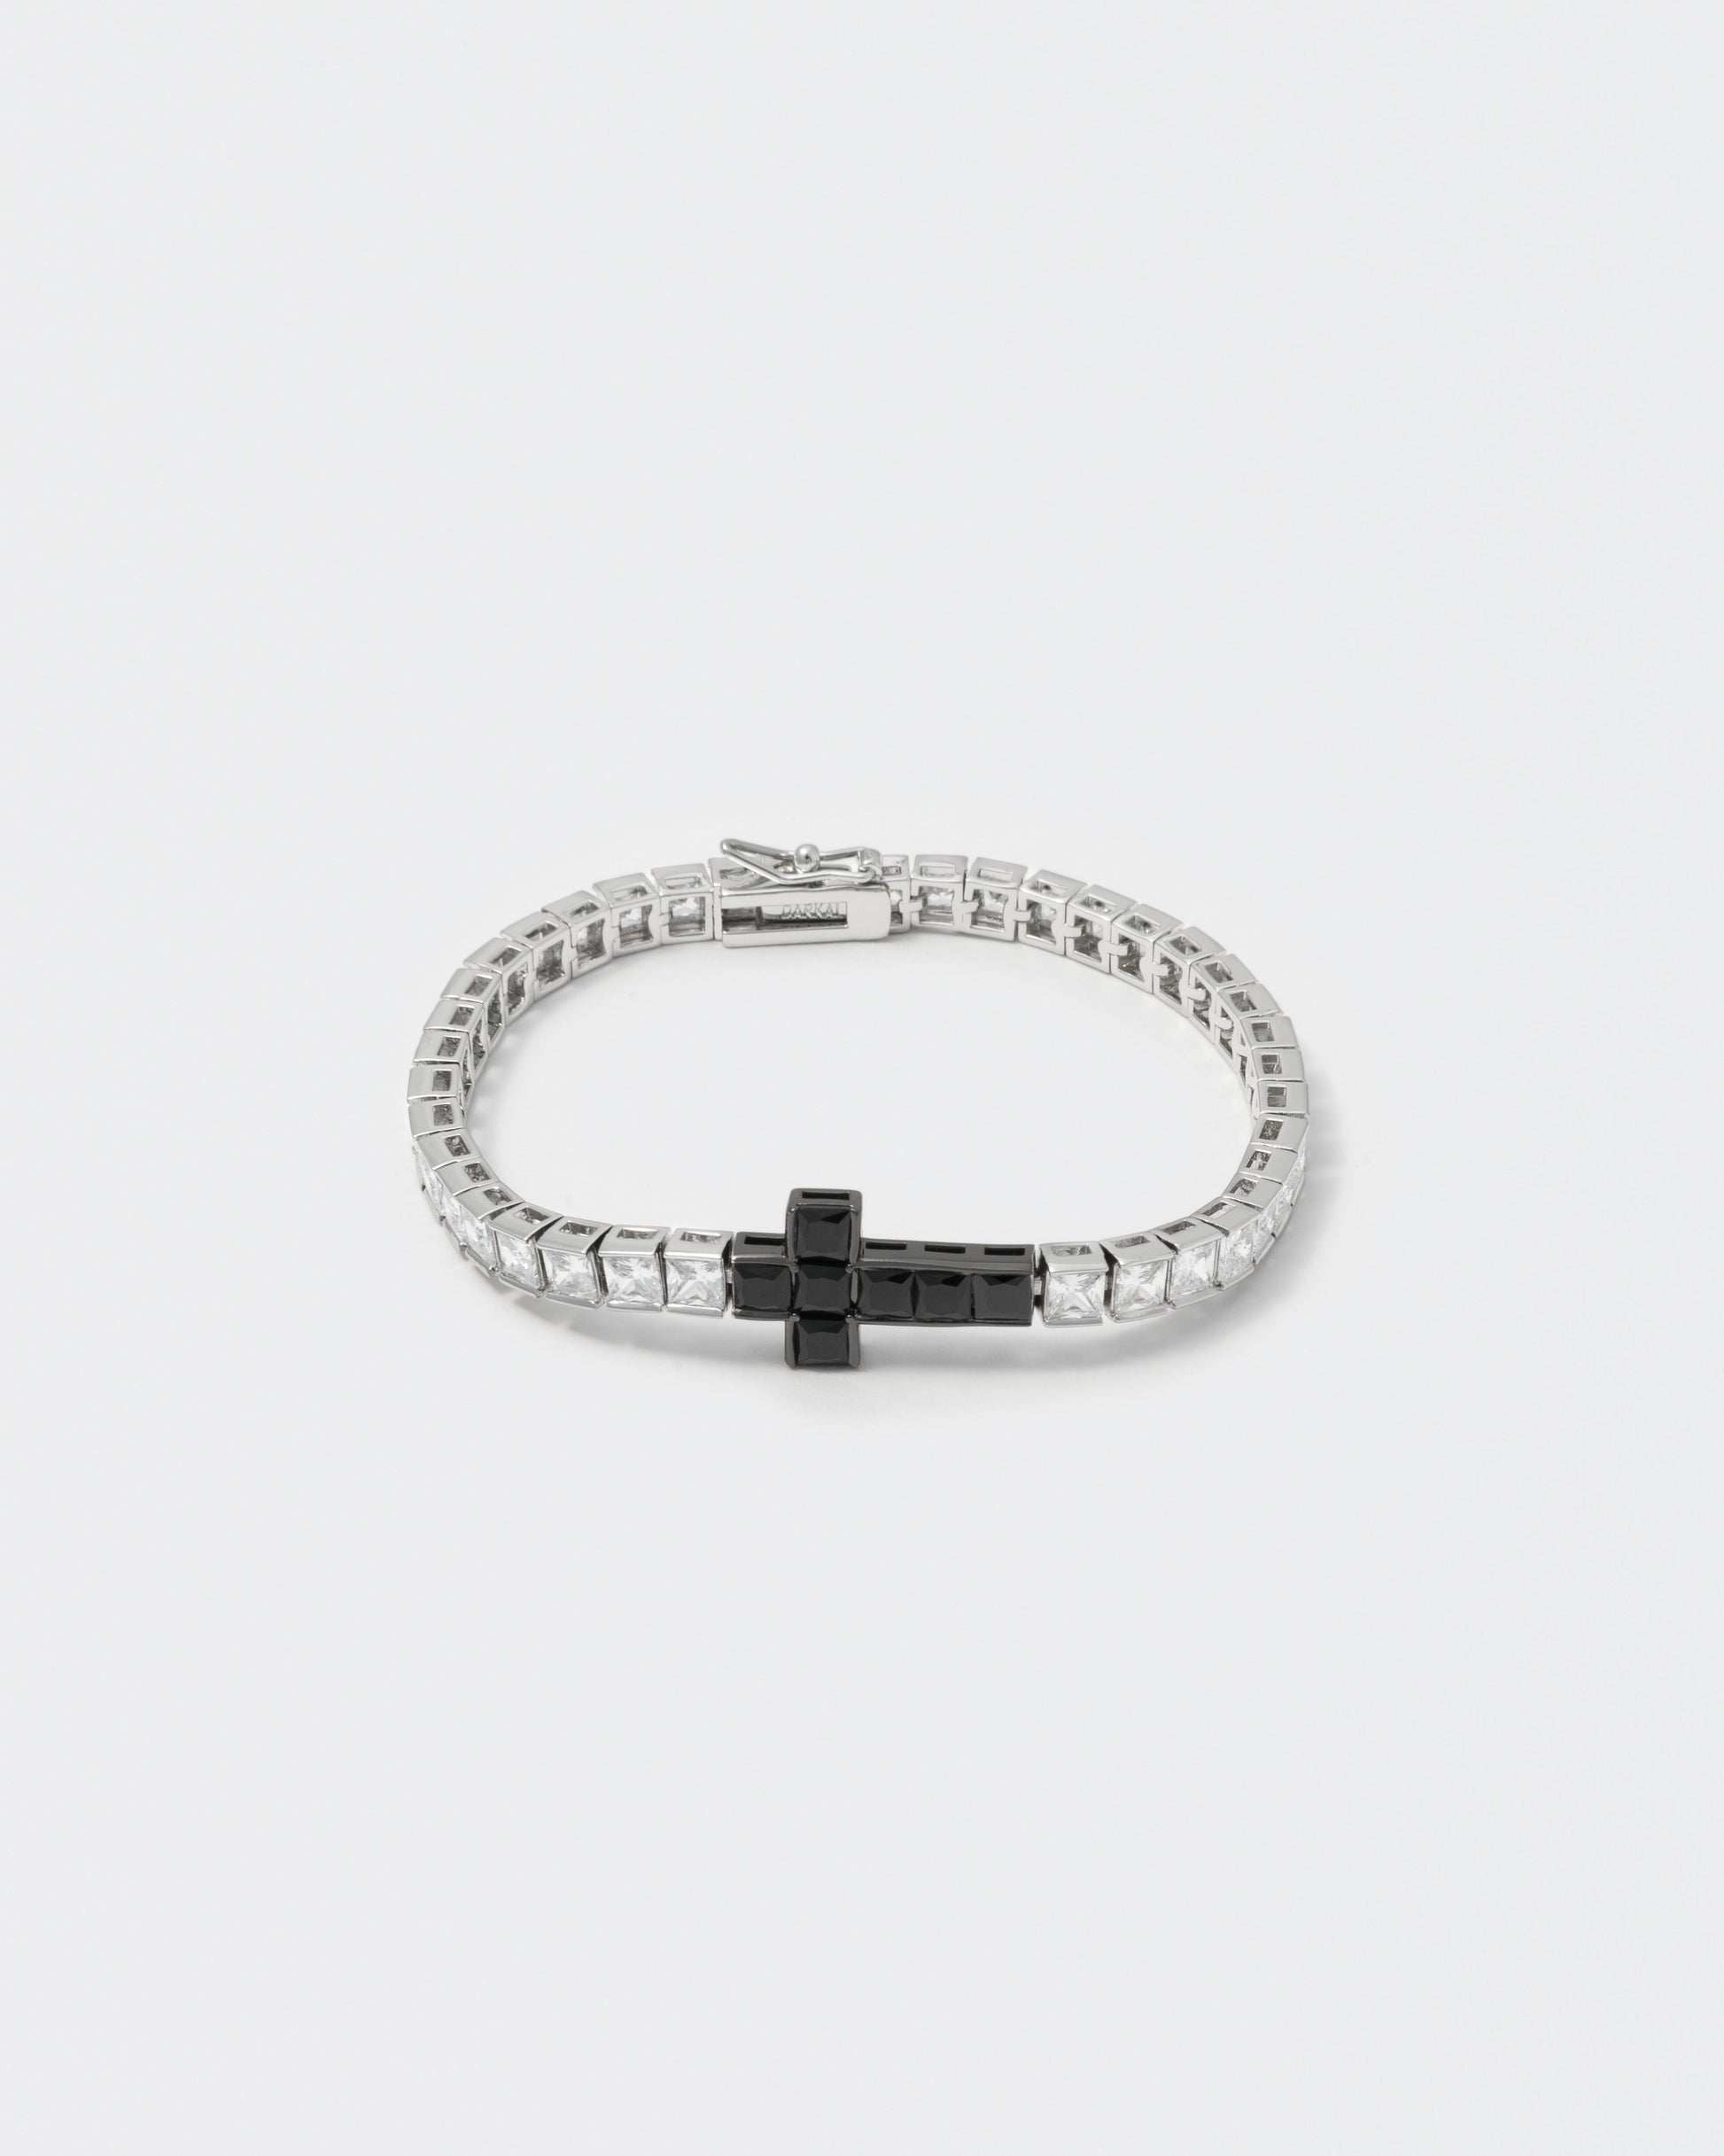 18k white gold and black coated tennis chain bracelet with contrasting cross element and hand-set princess-cut stones in white and black